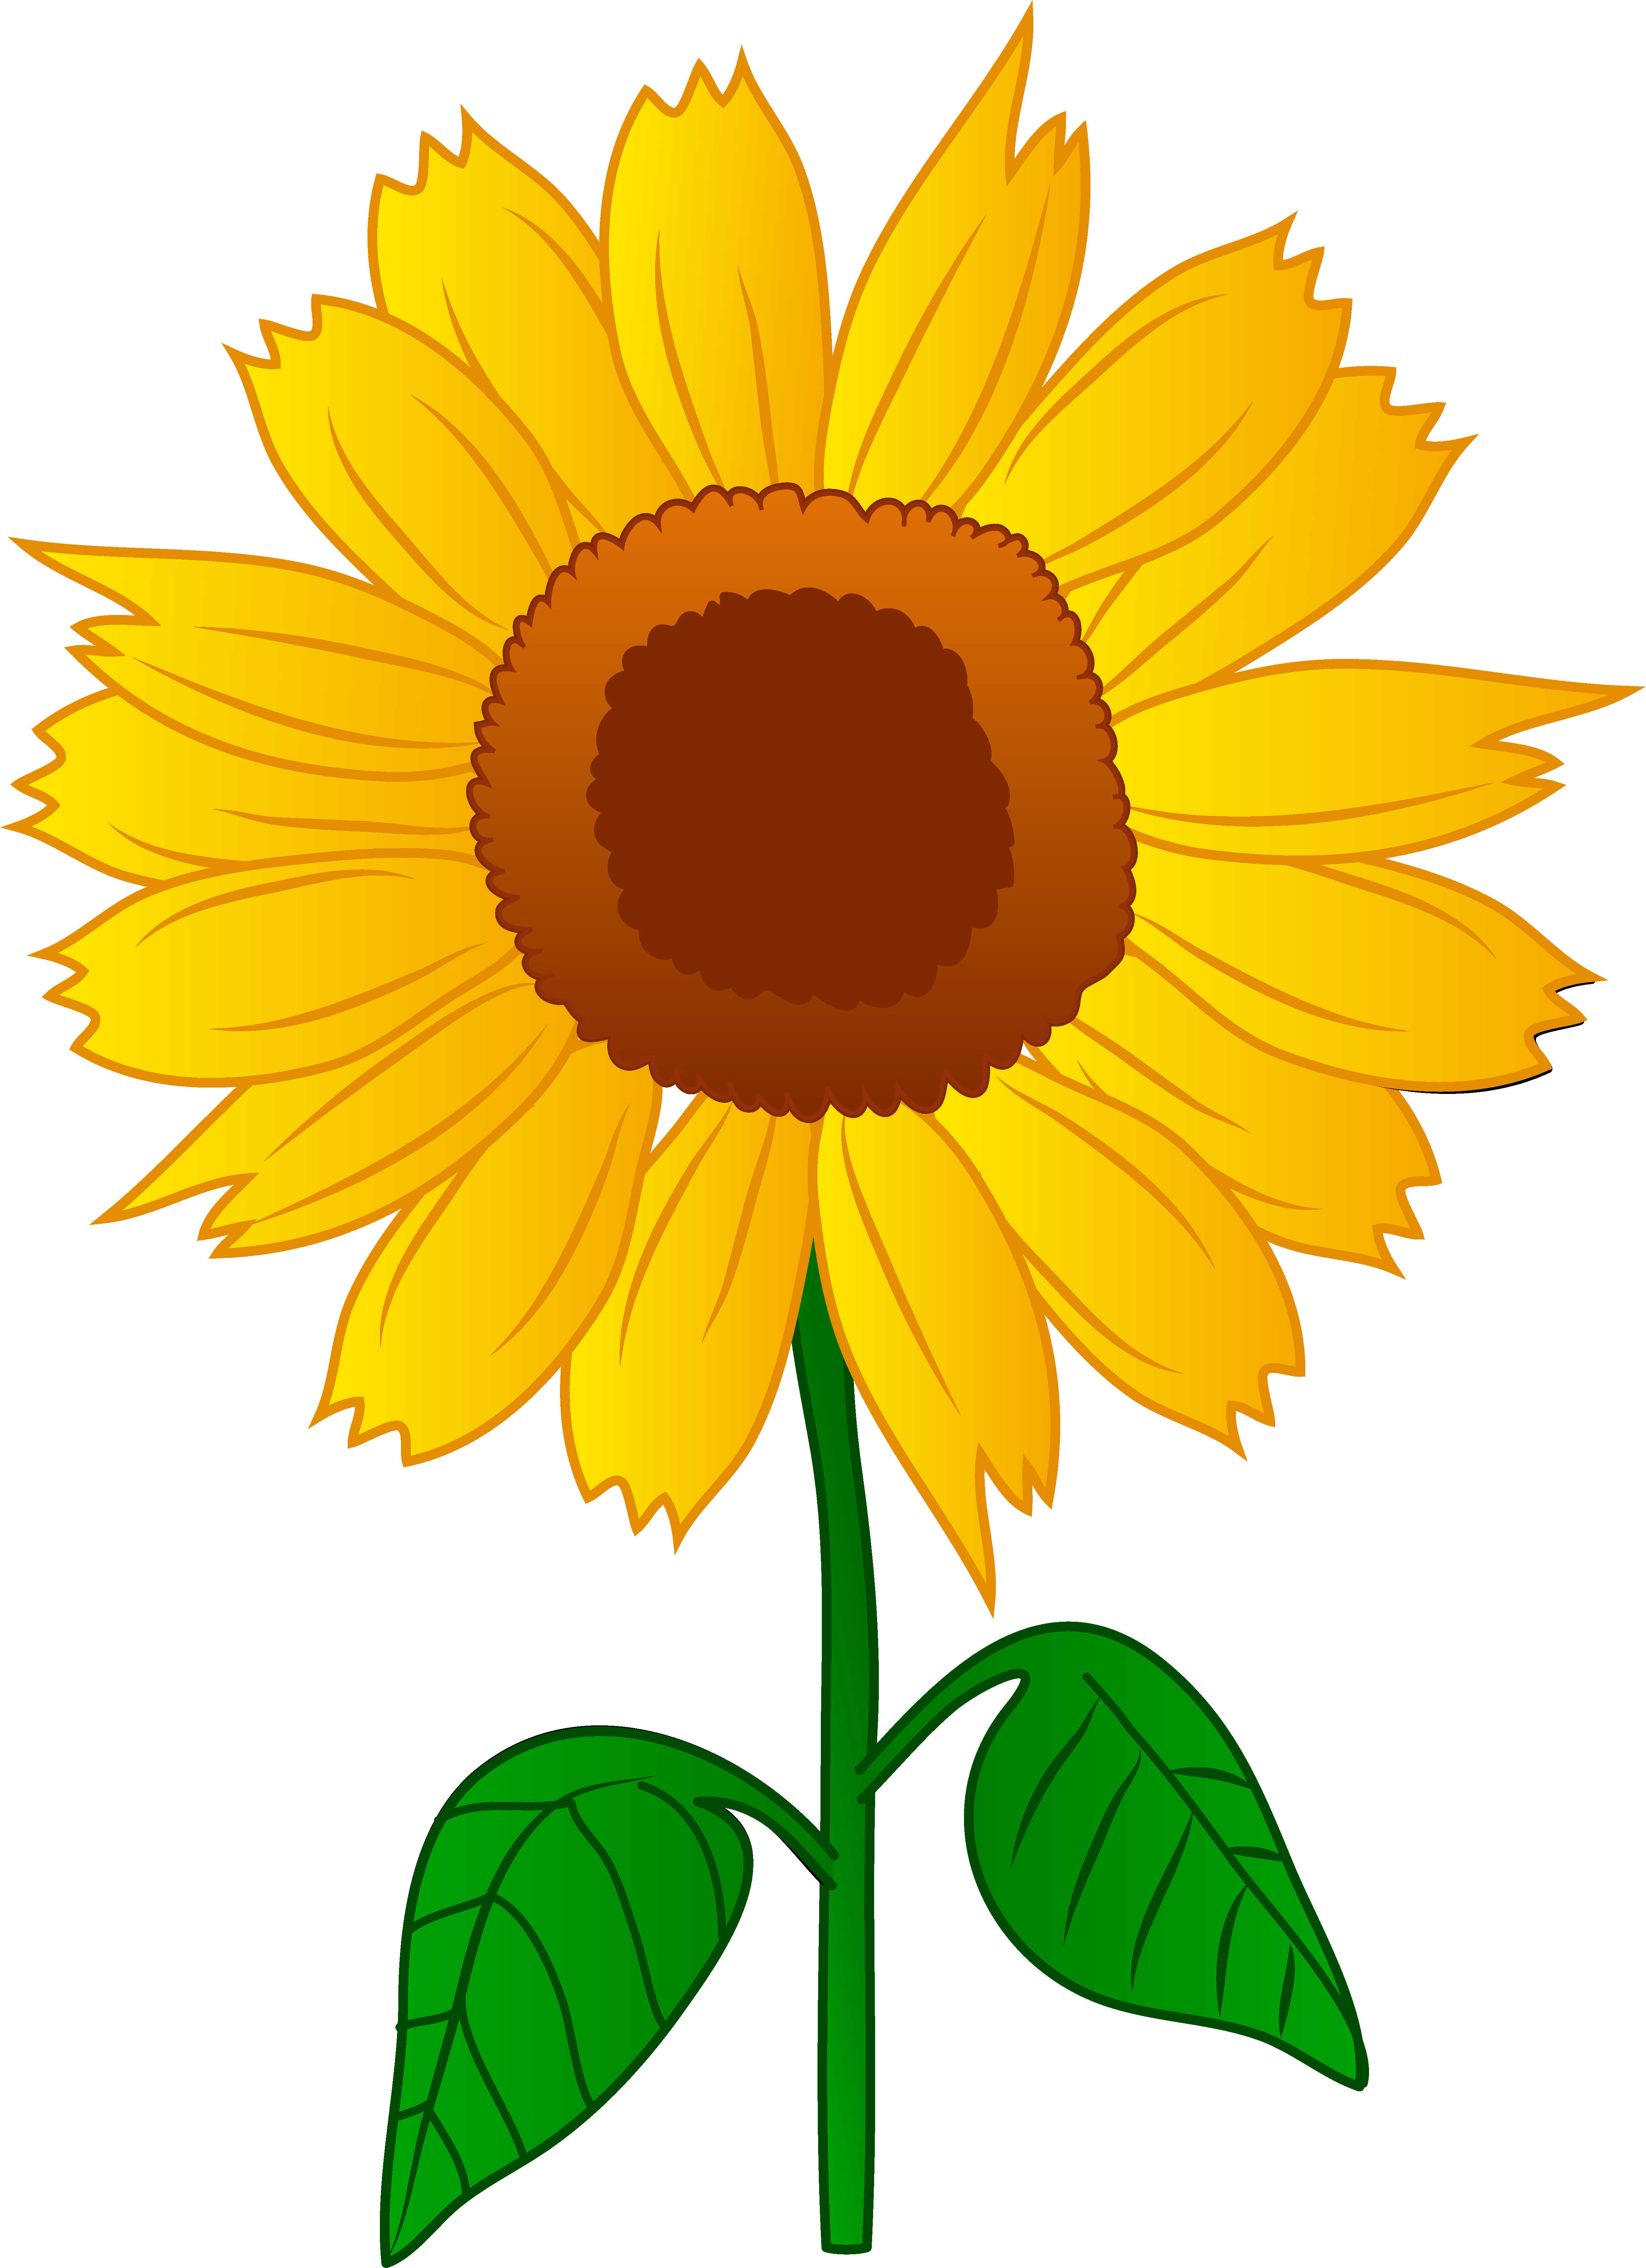 Cartoon Sunflowers Clipart - Cliparts and Others Art Inspiration